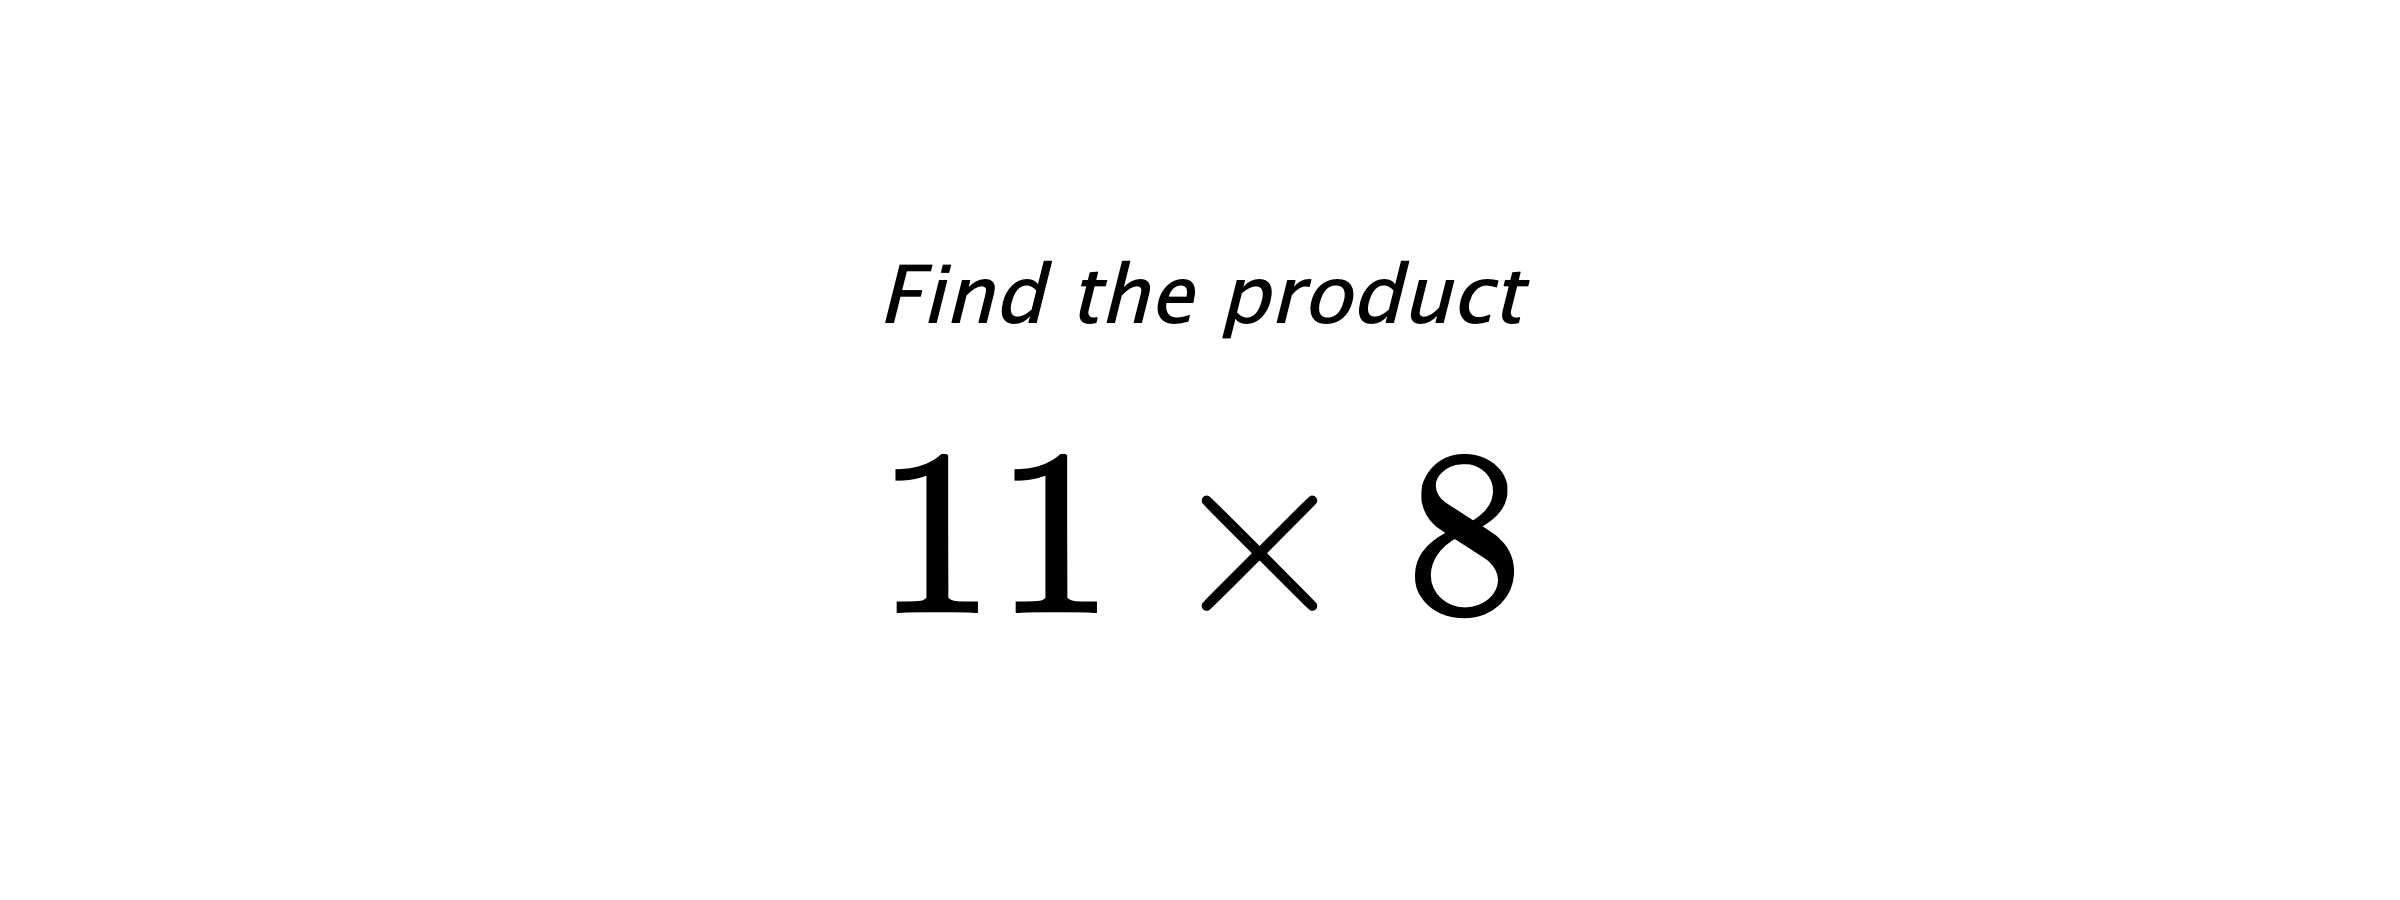 Find the product $ 11 \times 8 $